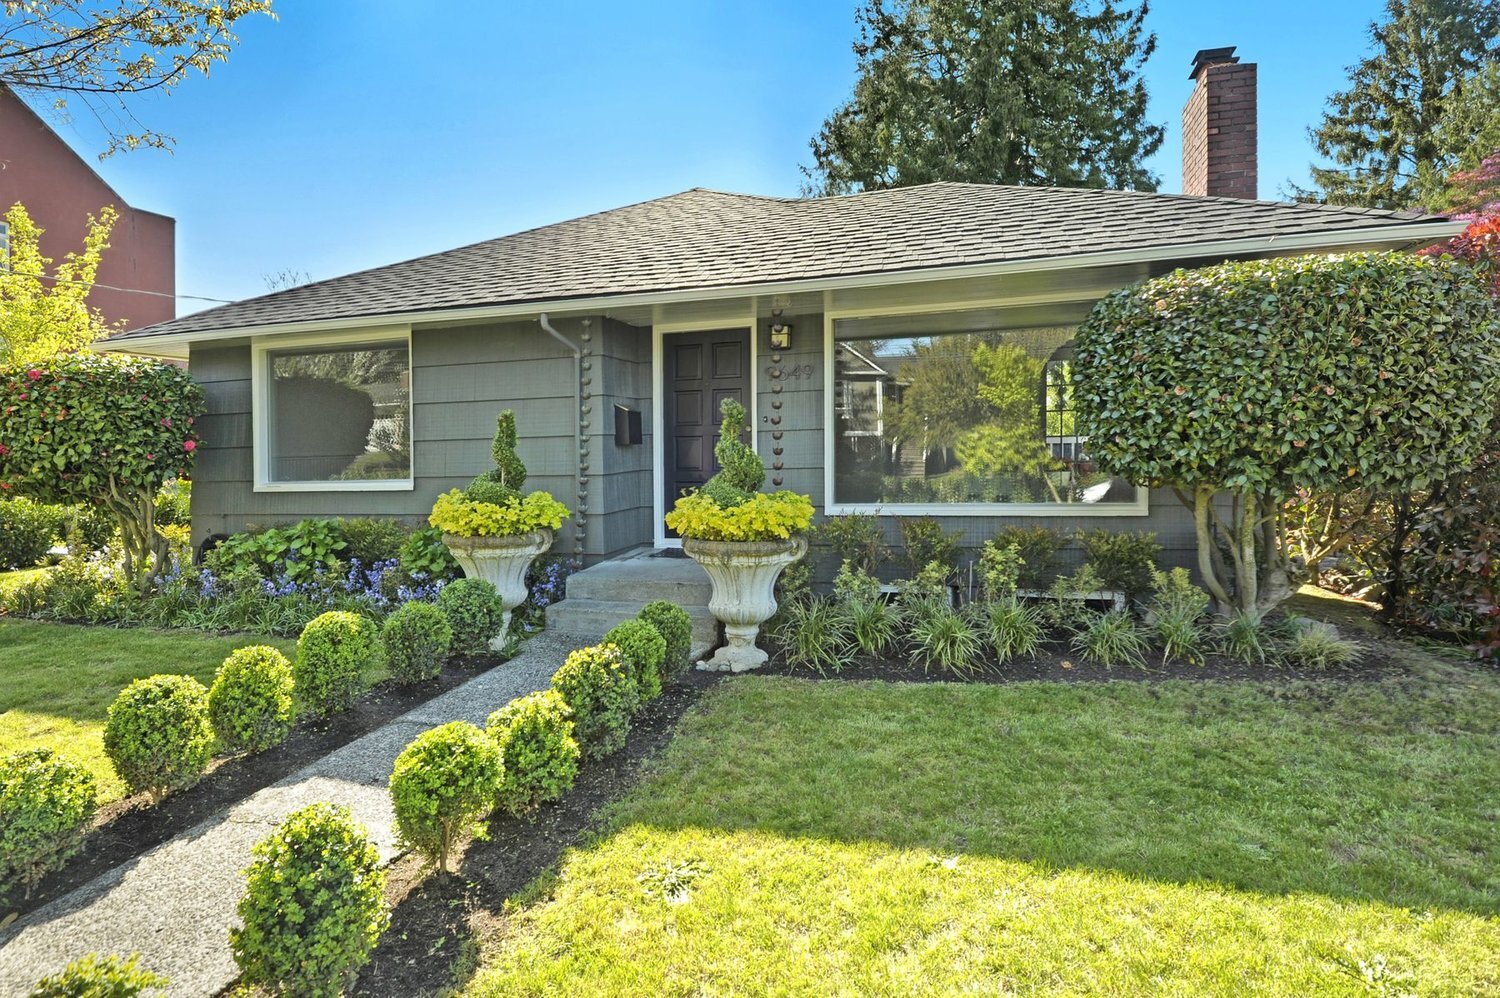 9649 60th Ave S, Seattle | $619,000